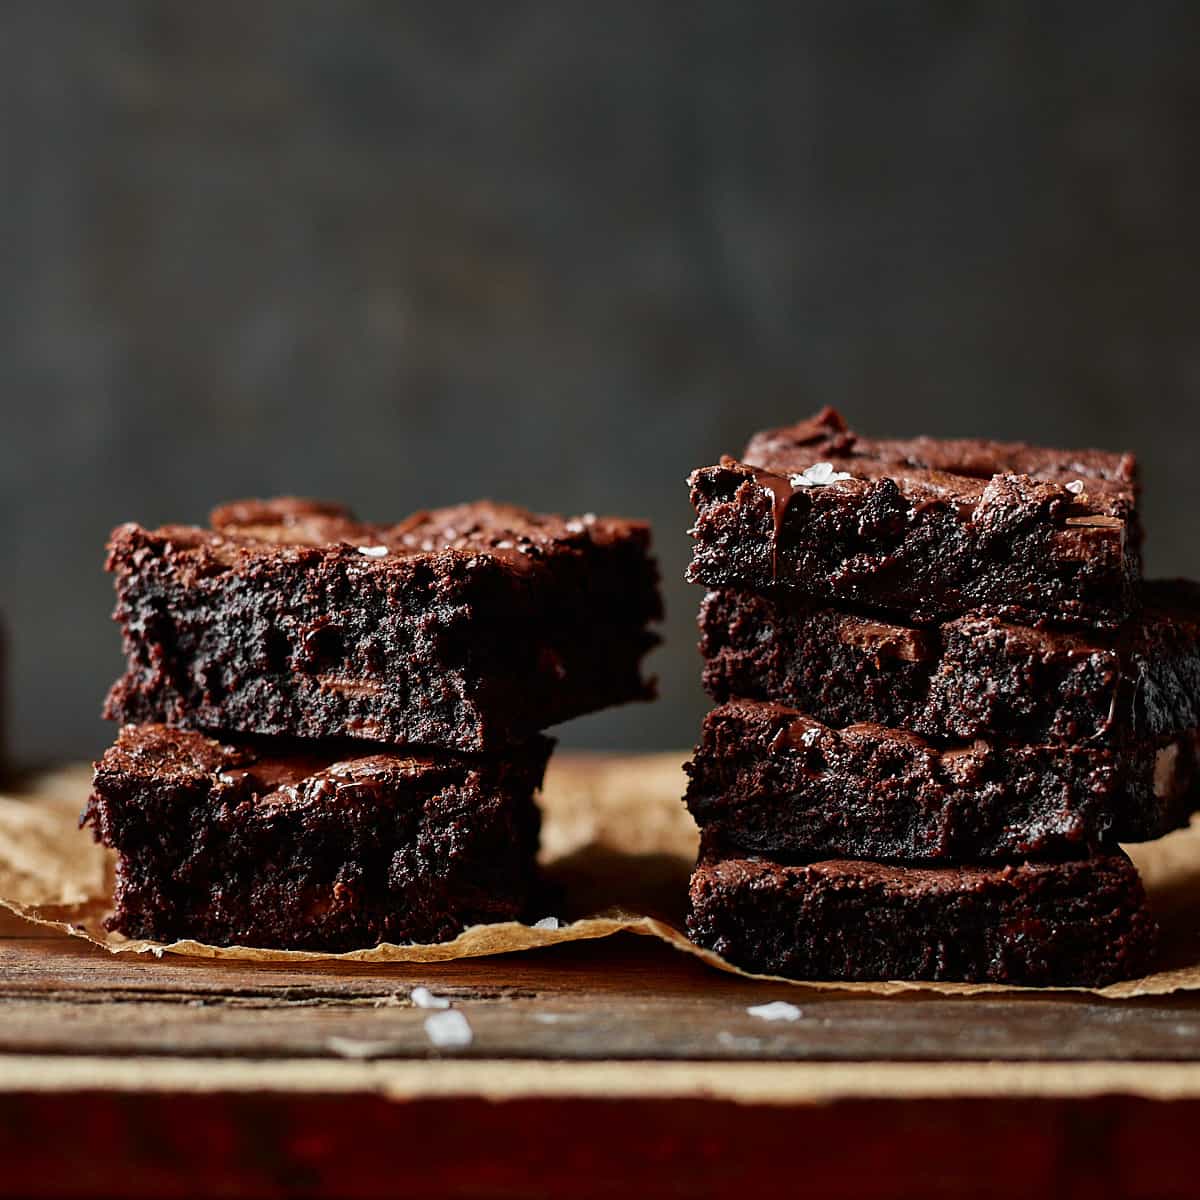 Side-by-side comparison of thicker and thinner brownies baked in different pans